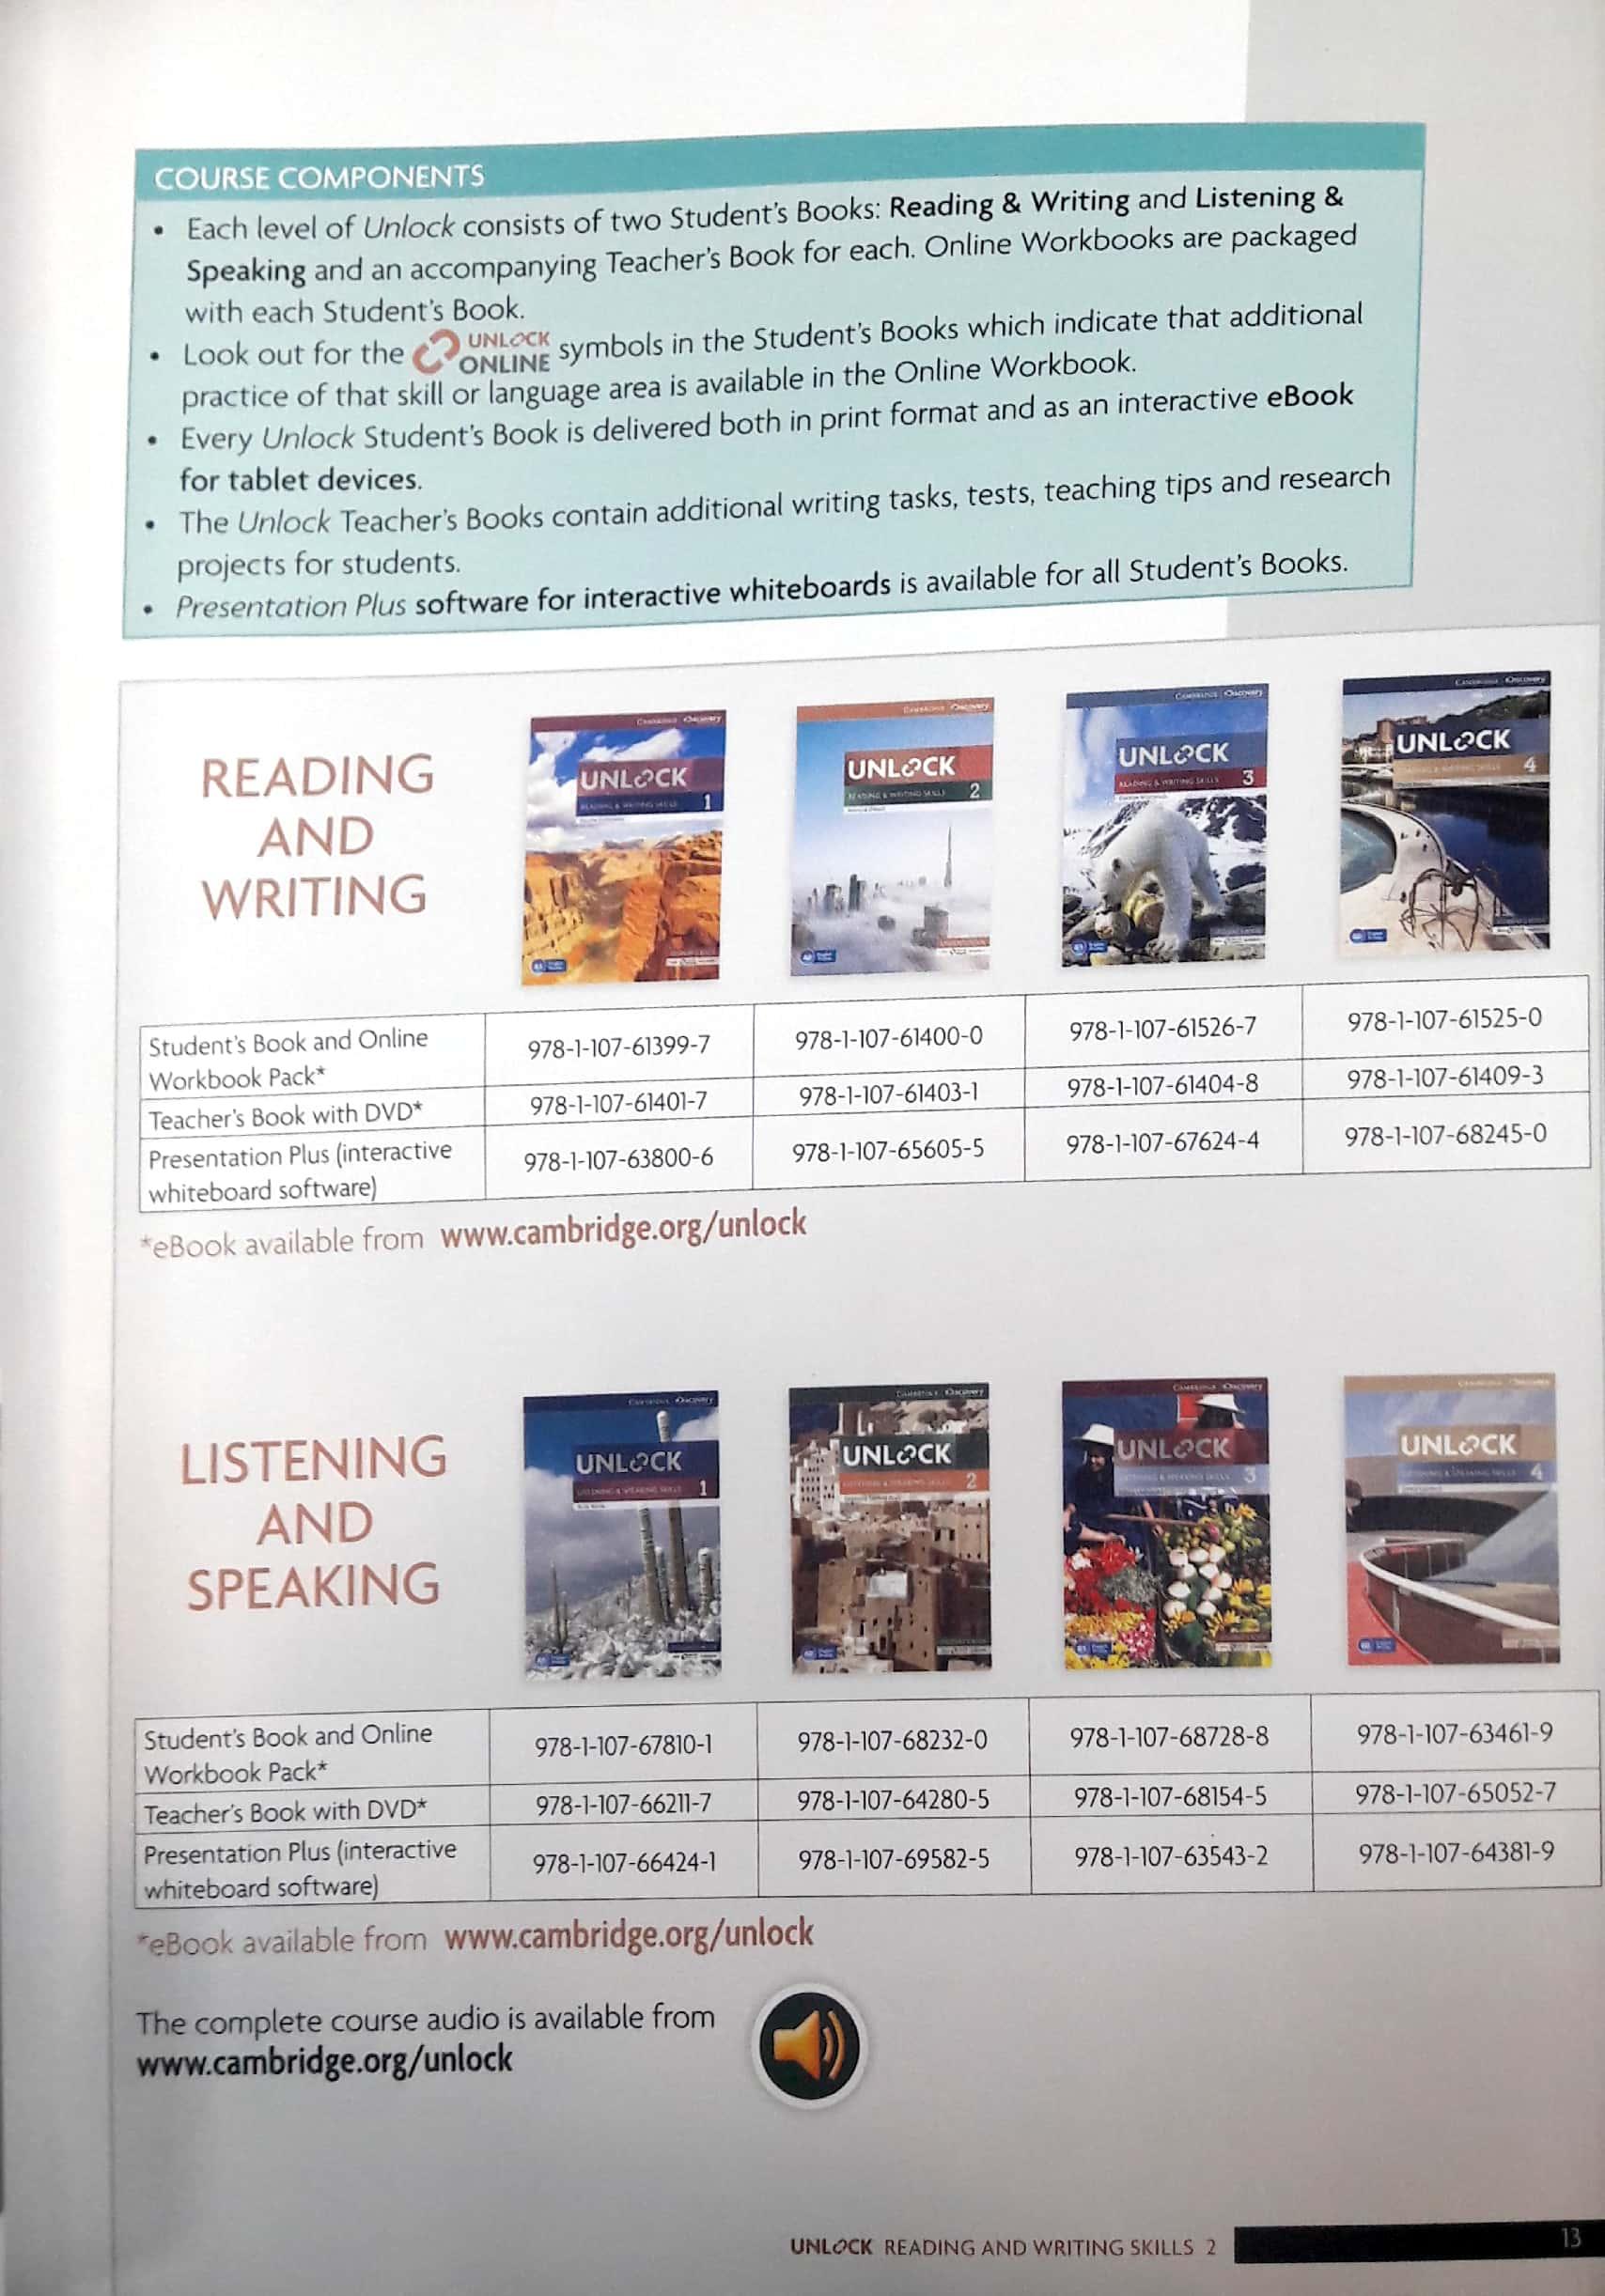 Unlock Level 2 Reading and Writing Skills Student's Book and Online Workbook: Level 2